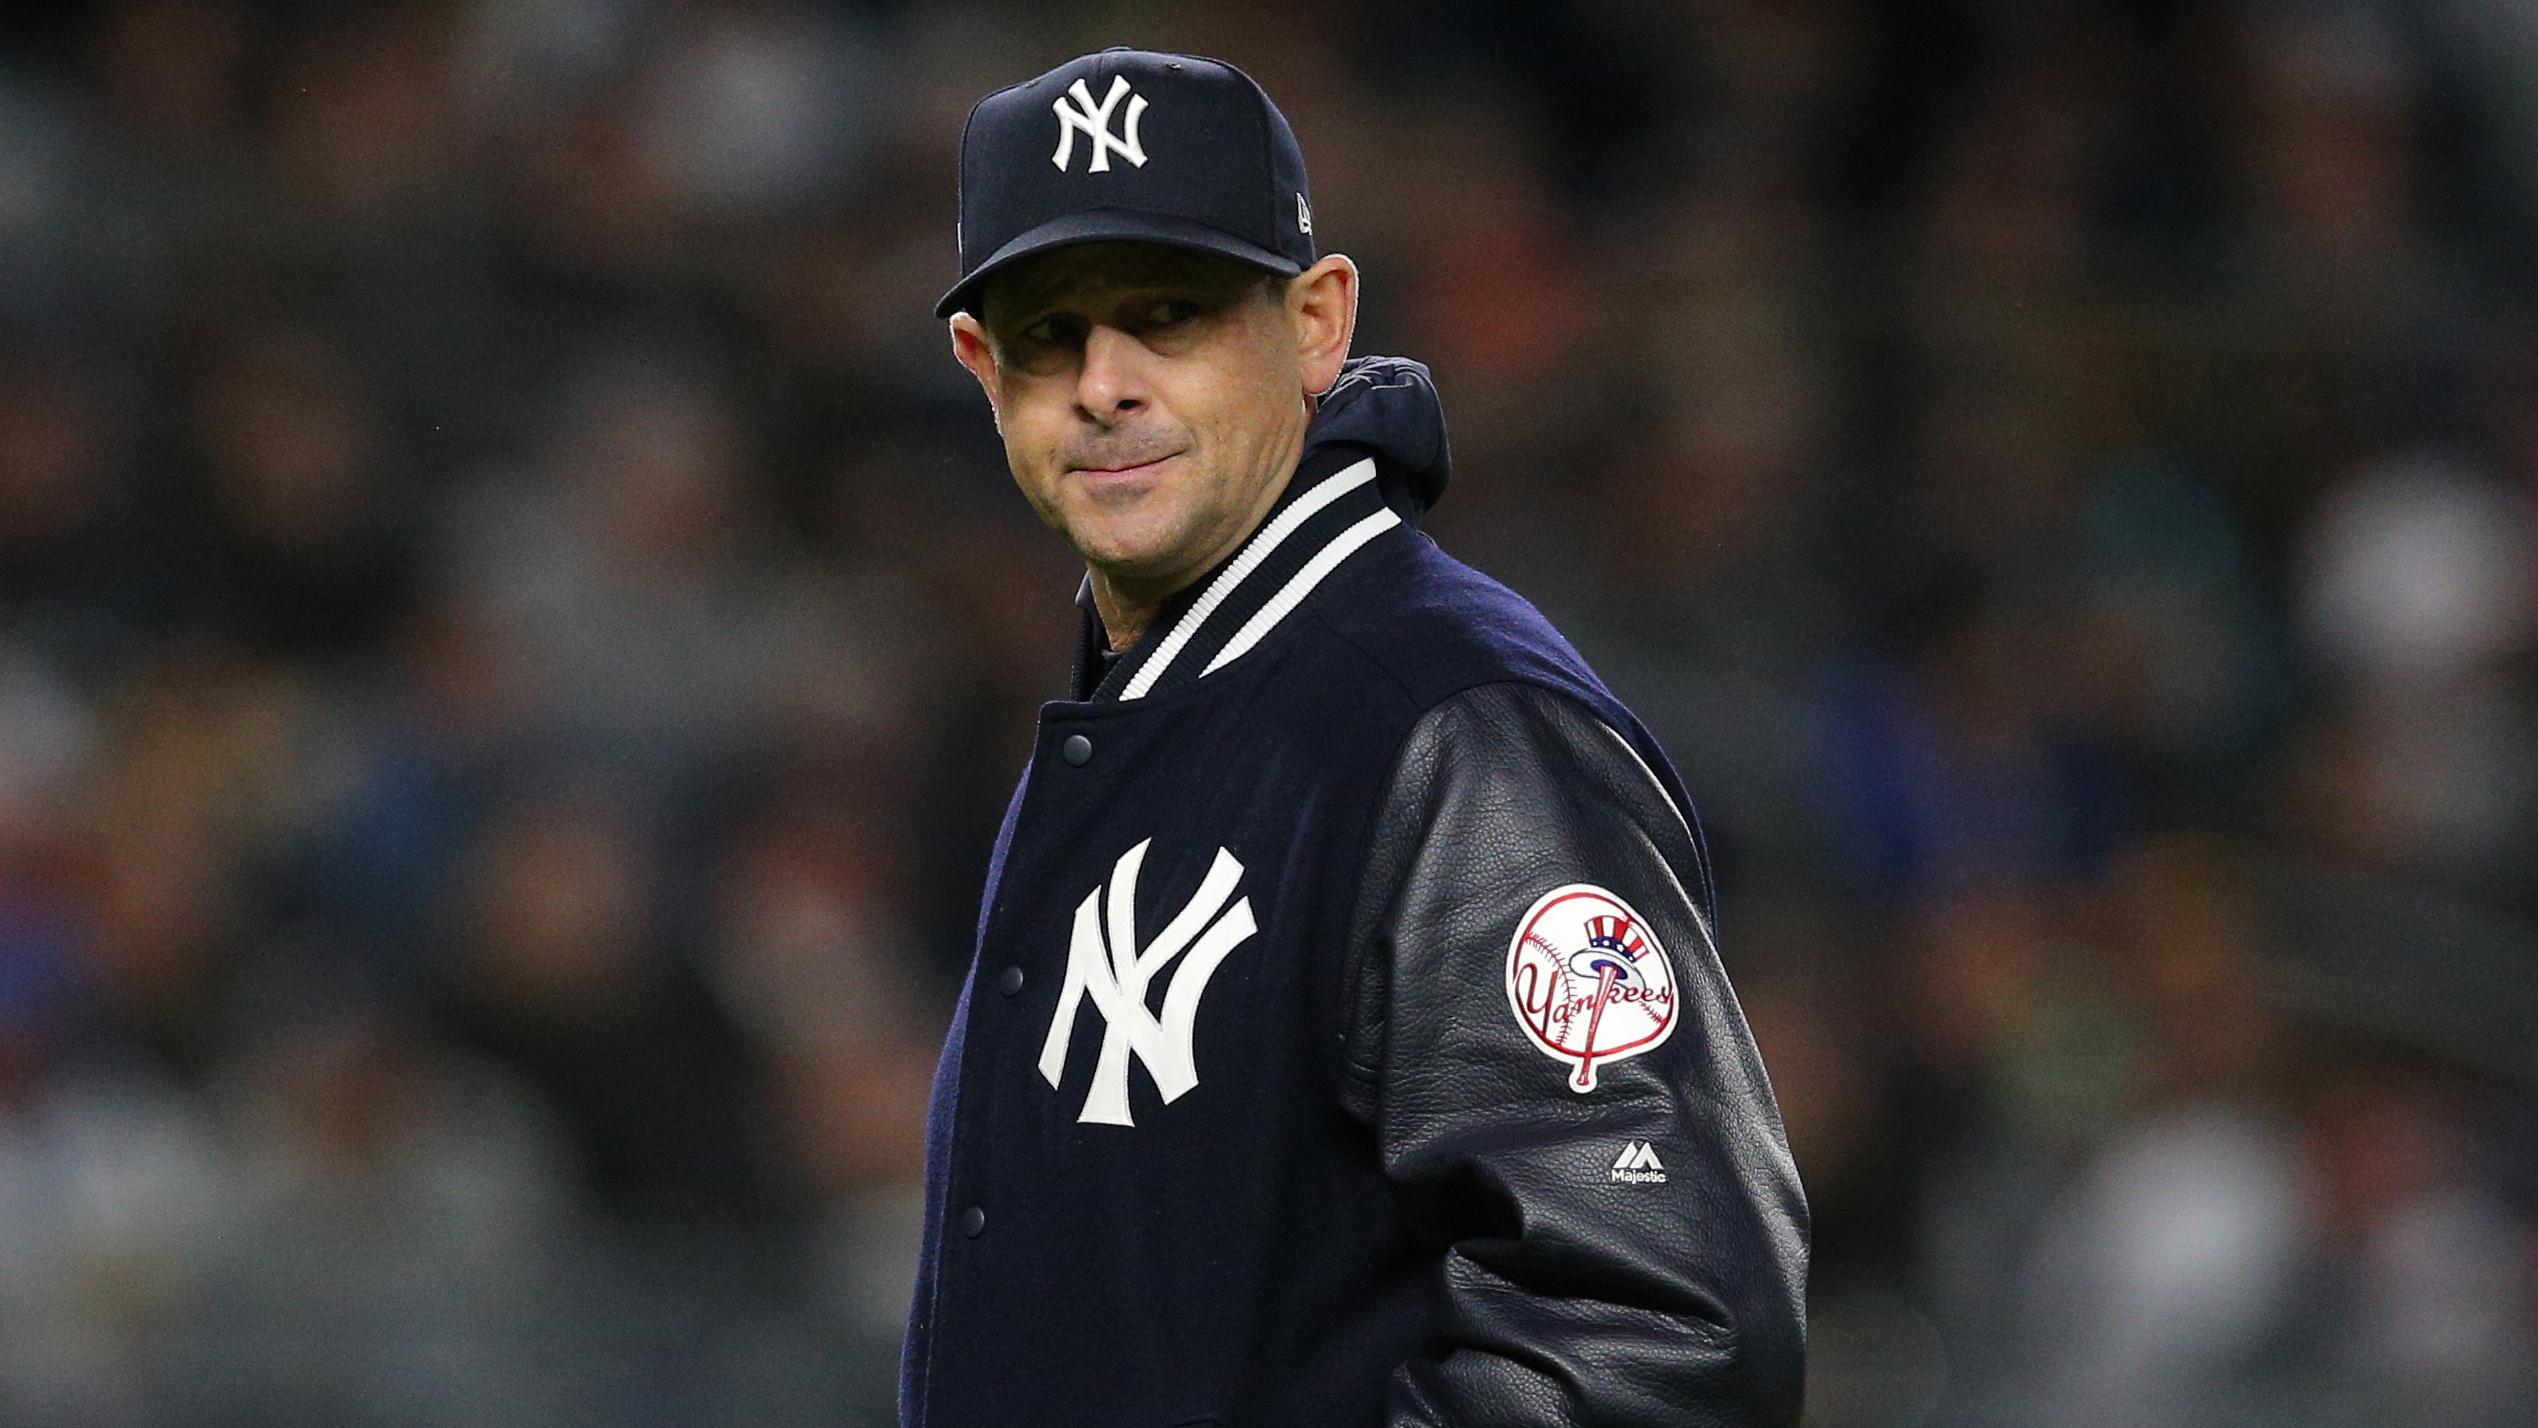 Oct 17, 2019; Bronx, NY, USA; New York Yankees manager Aaron Boone (17) leaves the mound after removing starting pitcher Masahiro Tanaka (not pictured) during the sixth inning of game four of the 2019 ALCS playoff baseball series against the Houston Astros at Yankee Stadium. / Brad Penner-USA TODAY Sports